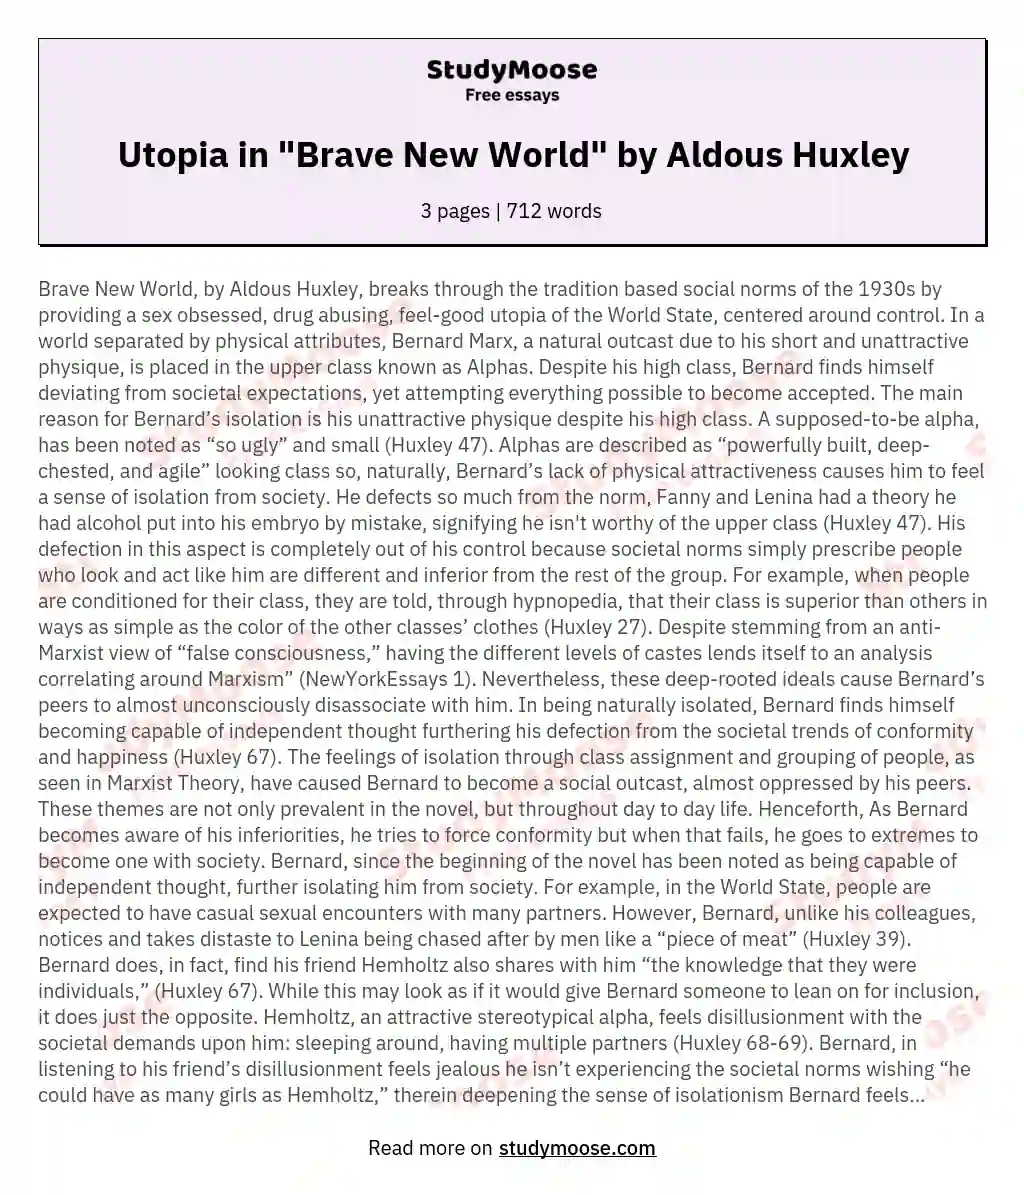 Utopia in "Brave New World" by Aldous Huxley